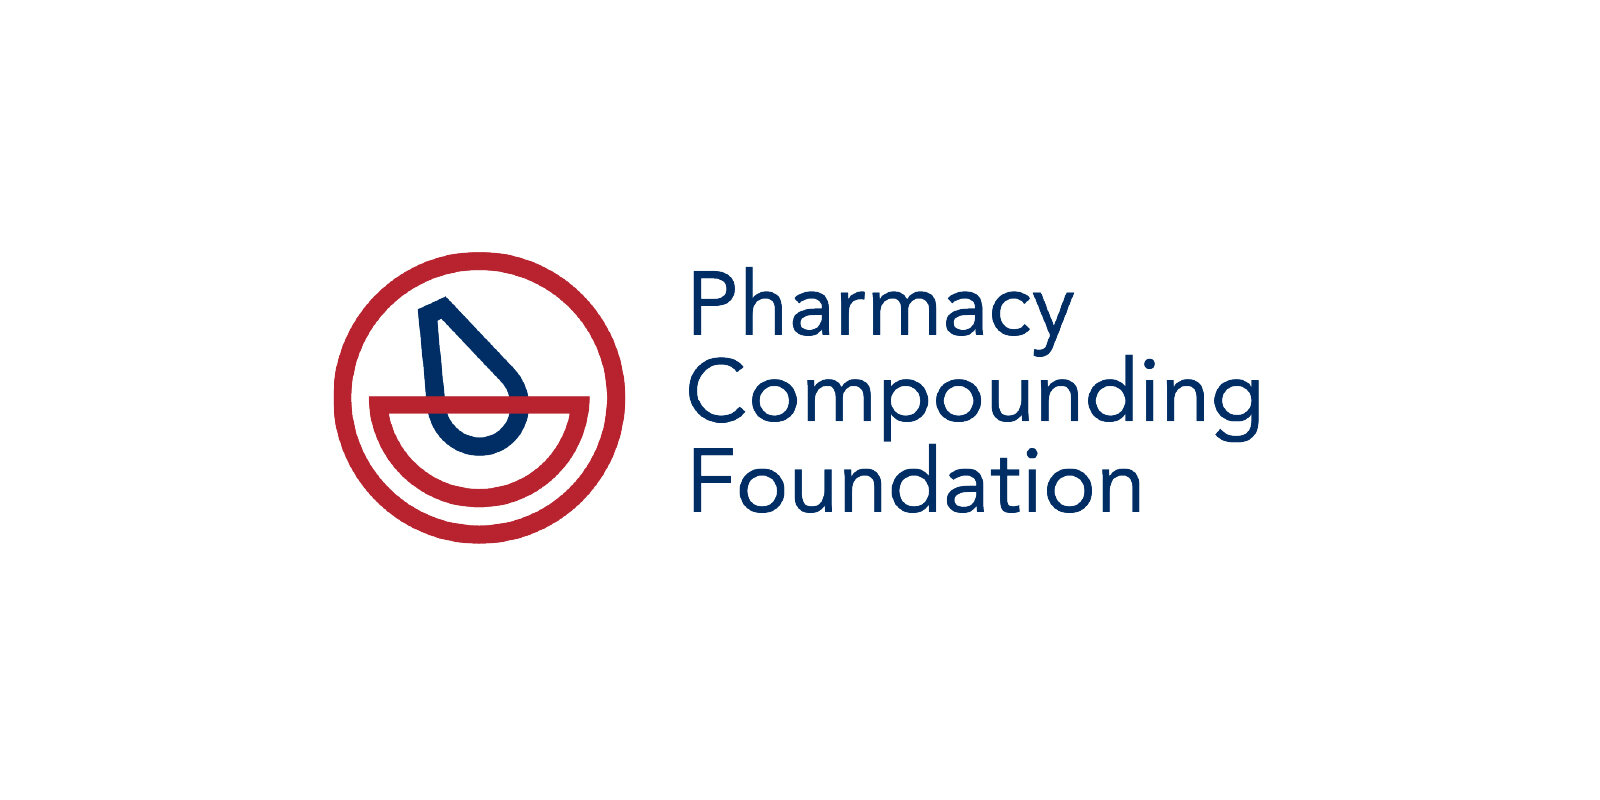 prescription-compounding-for-human-and-veterinary-clients-florence-sc-alliance-for-pharmacy-compounding-icon.jpg